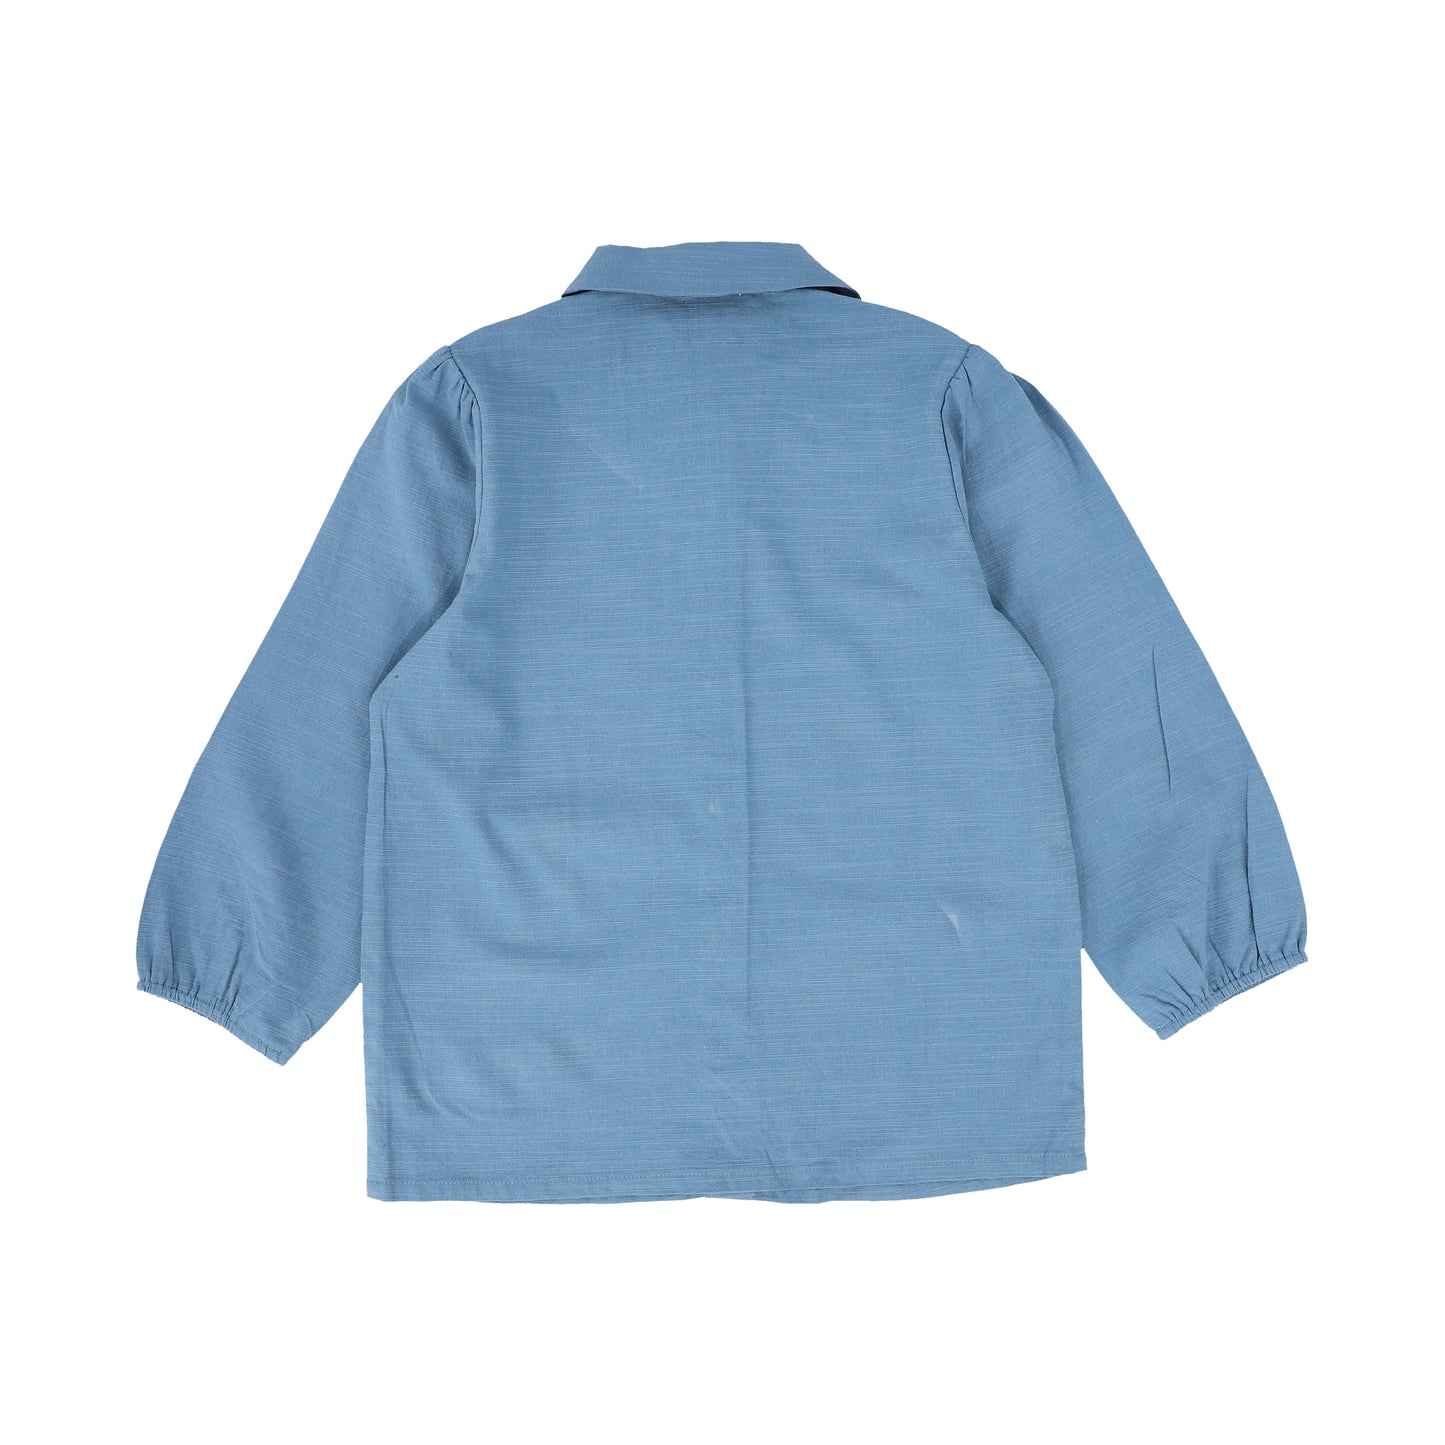 BACE COLLECTION BLUE PUFF SLEEVE COLLARD BLOUSE